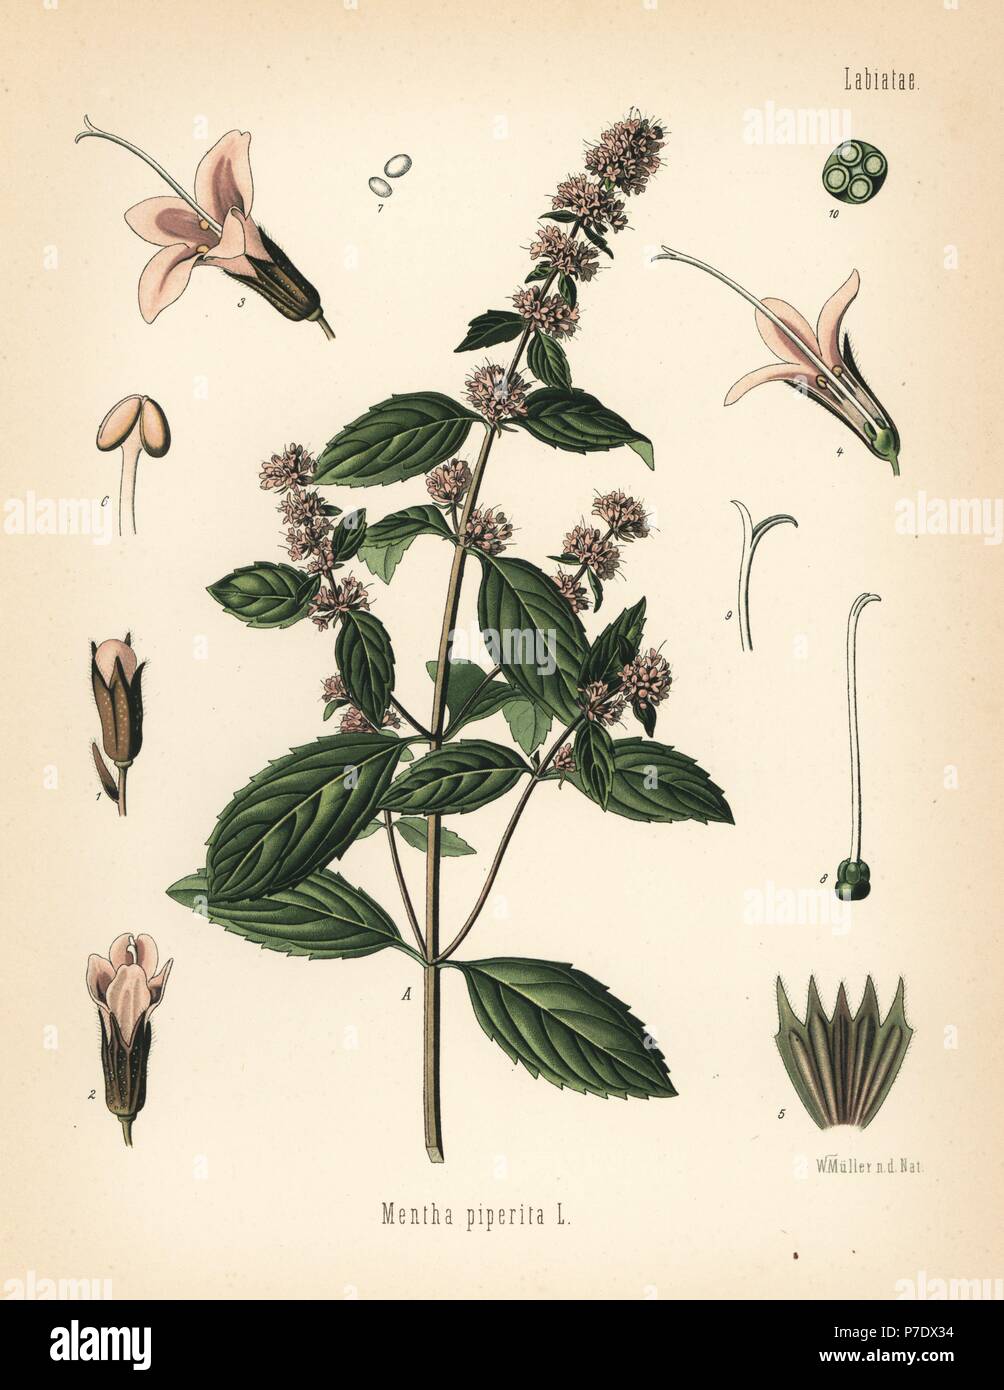 Peppermint, Mentha piperita. Chromolithograph after a botanical illustration by Walther Muller from Hermann Adolph Koehler's Medicinal Plants, edited by Gustav Pabst, Koehler, Germany, 1887. Stock Photo